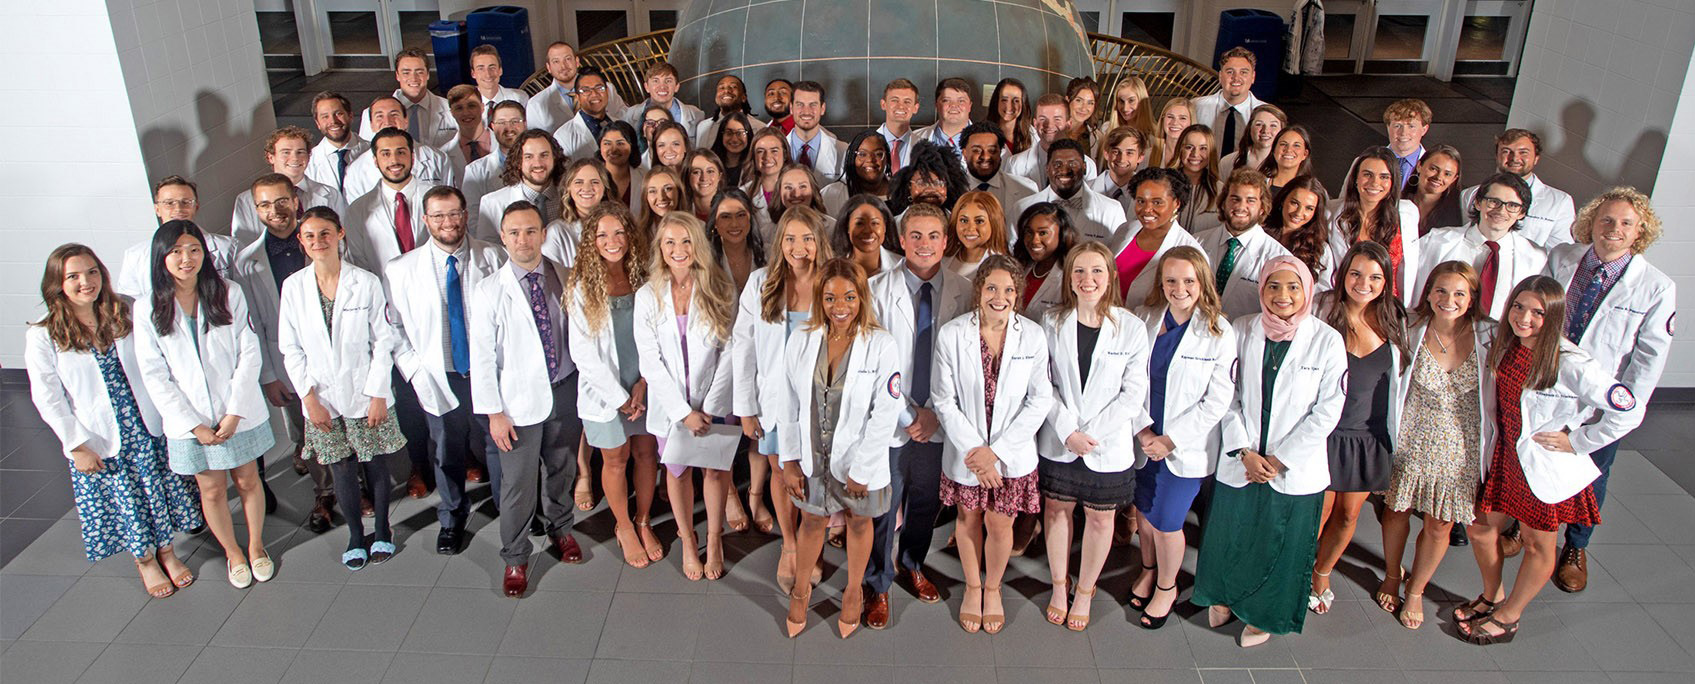 The Class of 2024 on the day of their White Coat Ceremony